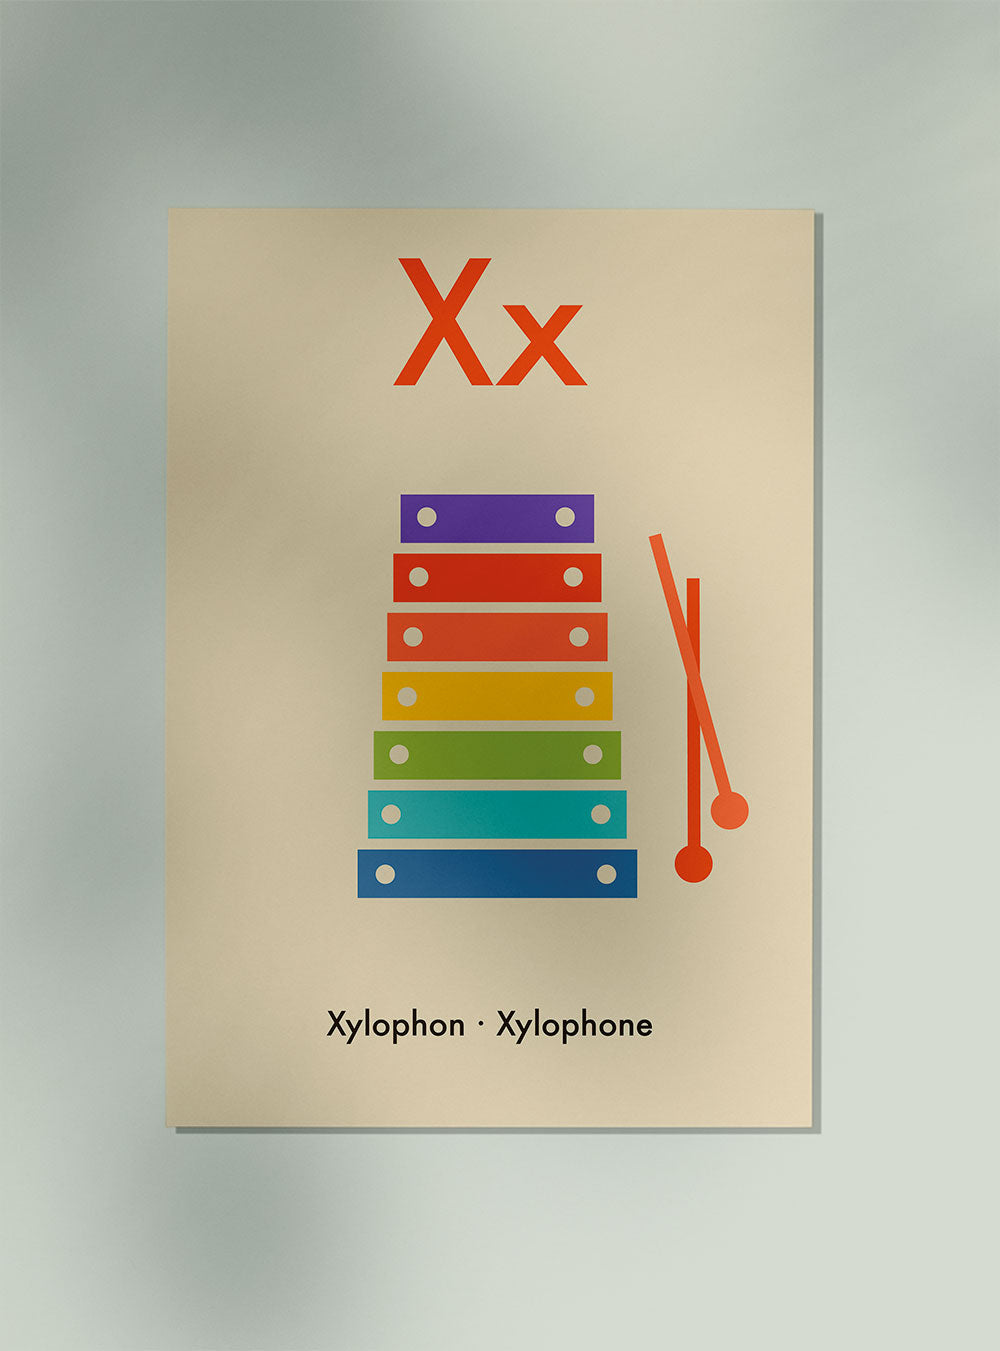 X for Xylophone - Children's Alphabet Poster in German and English